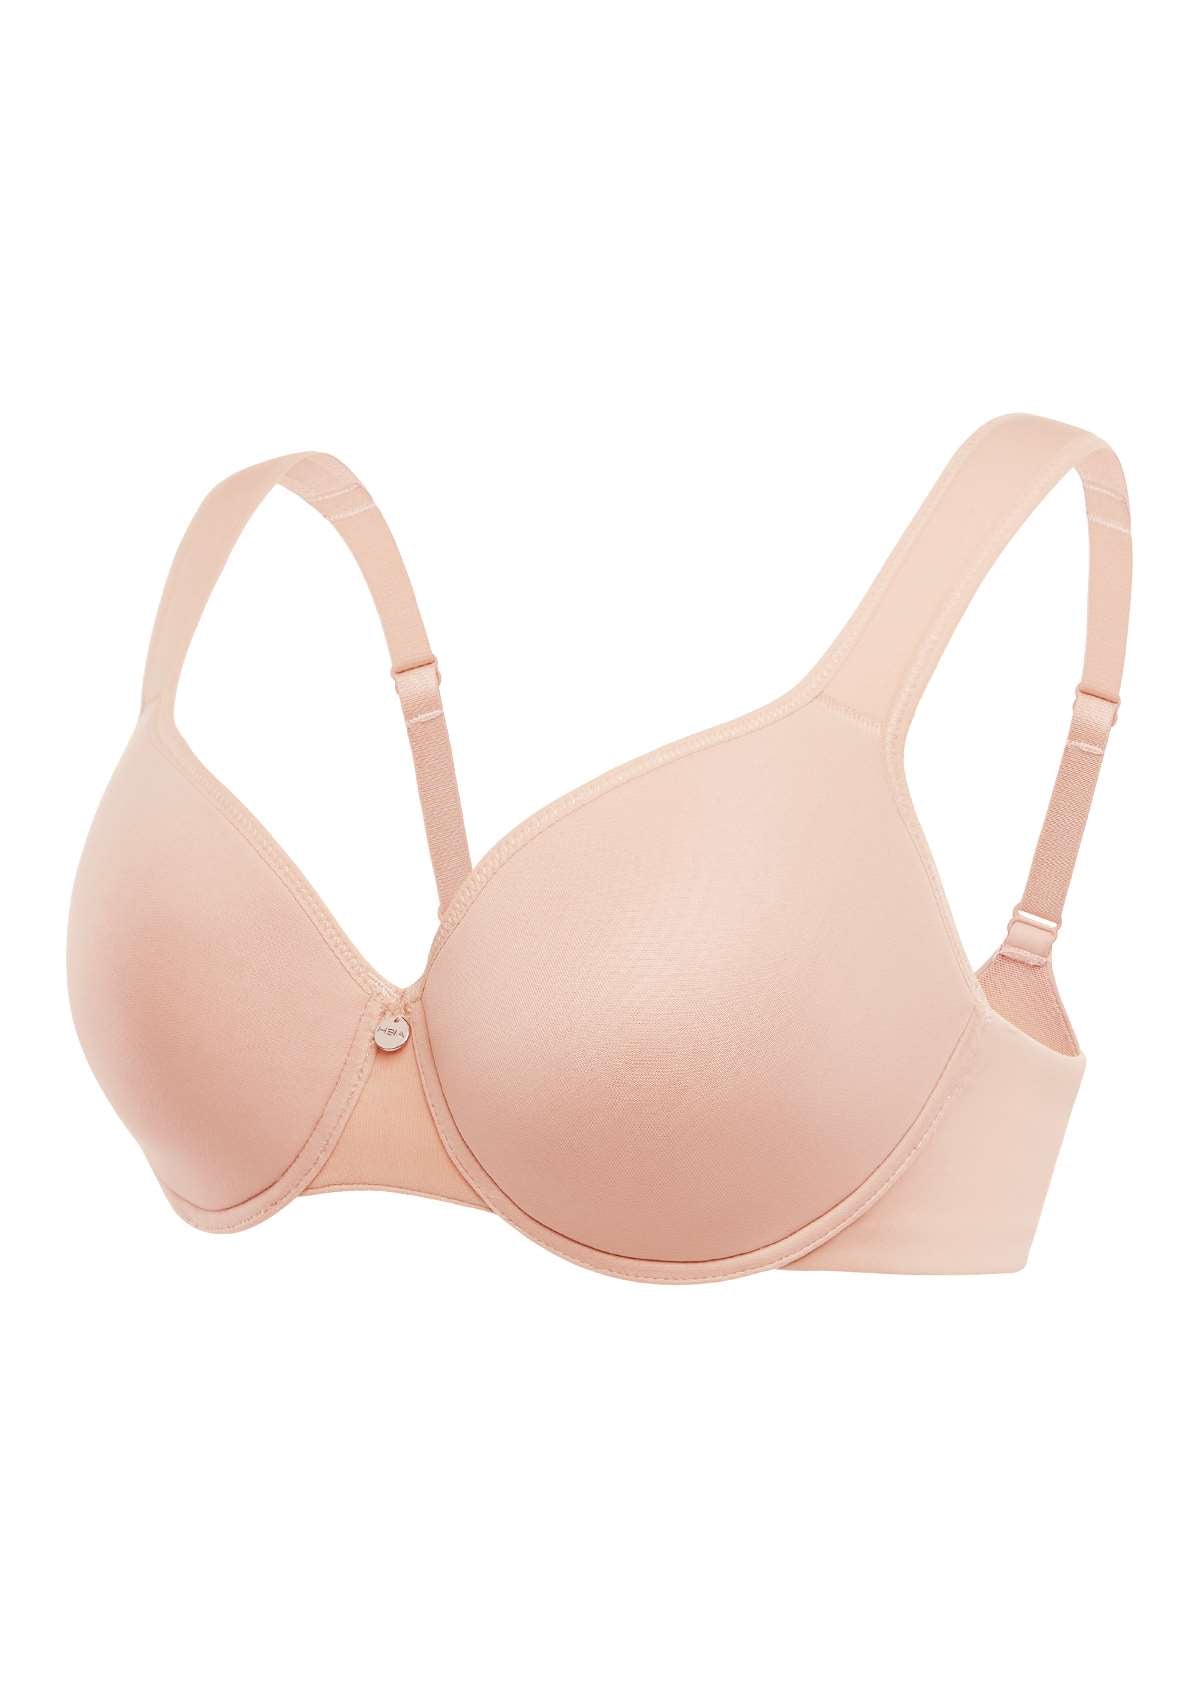 HSIA Patricia Smooth Classic T-shirt Lightly Padded Minimizer Bra - Light Pink / 40 / G